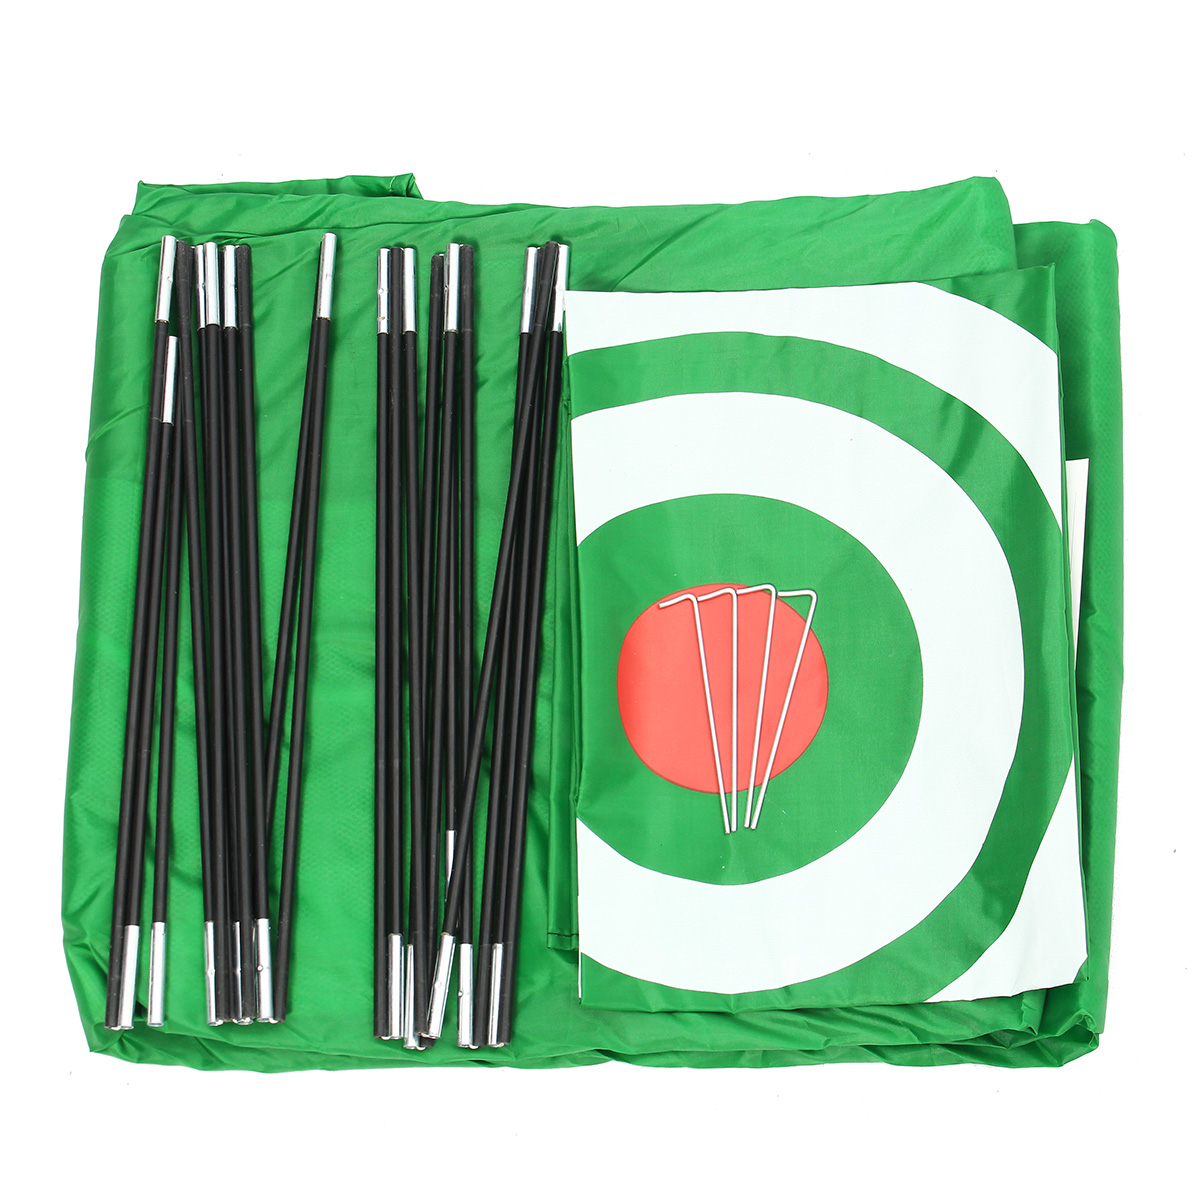 3M-Golf-Training-Net-Portable-Foldable-Practice-Golf-Chipping-Net-Hitting-Cage-Trainer-Indoor-Outdoo-1709126-5